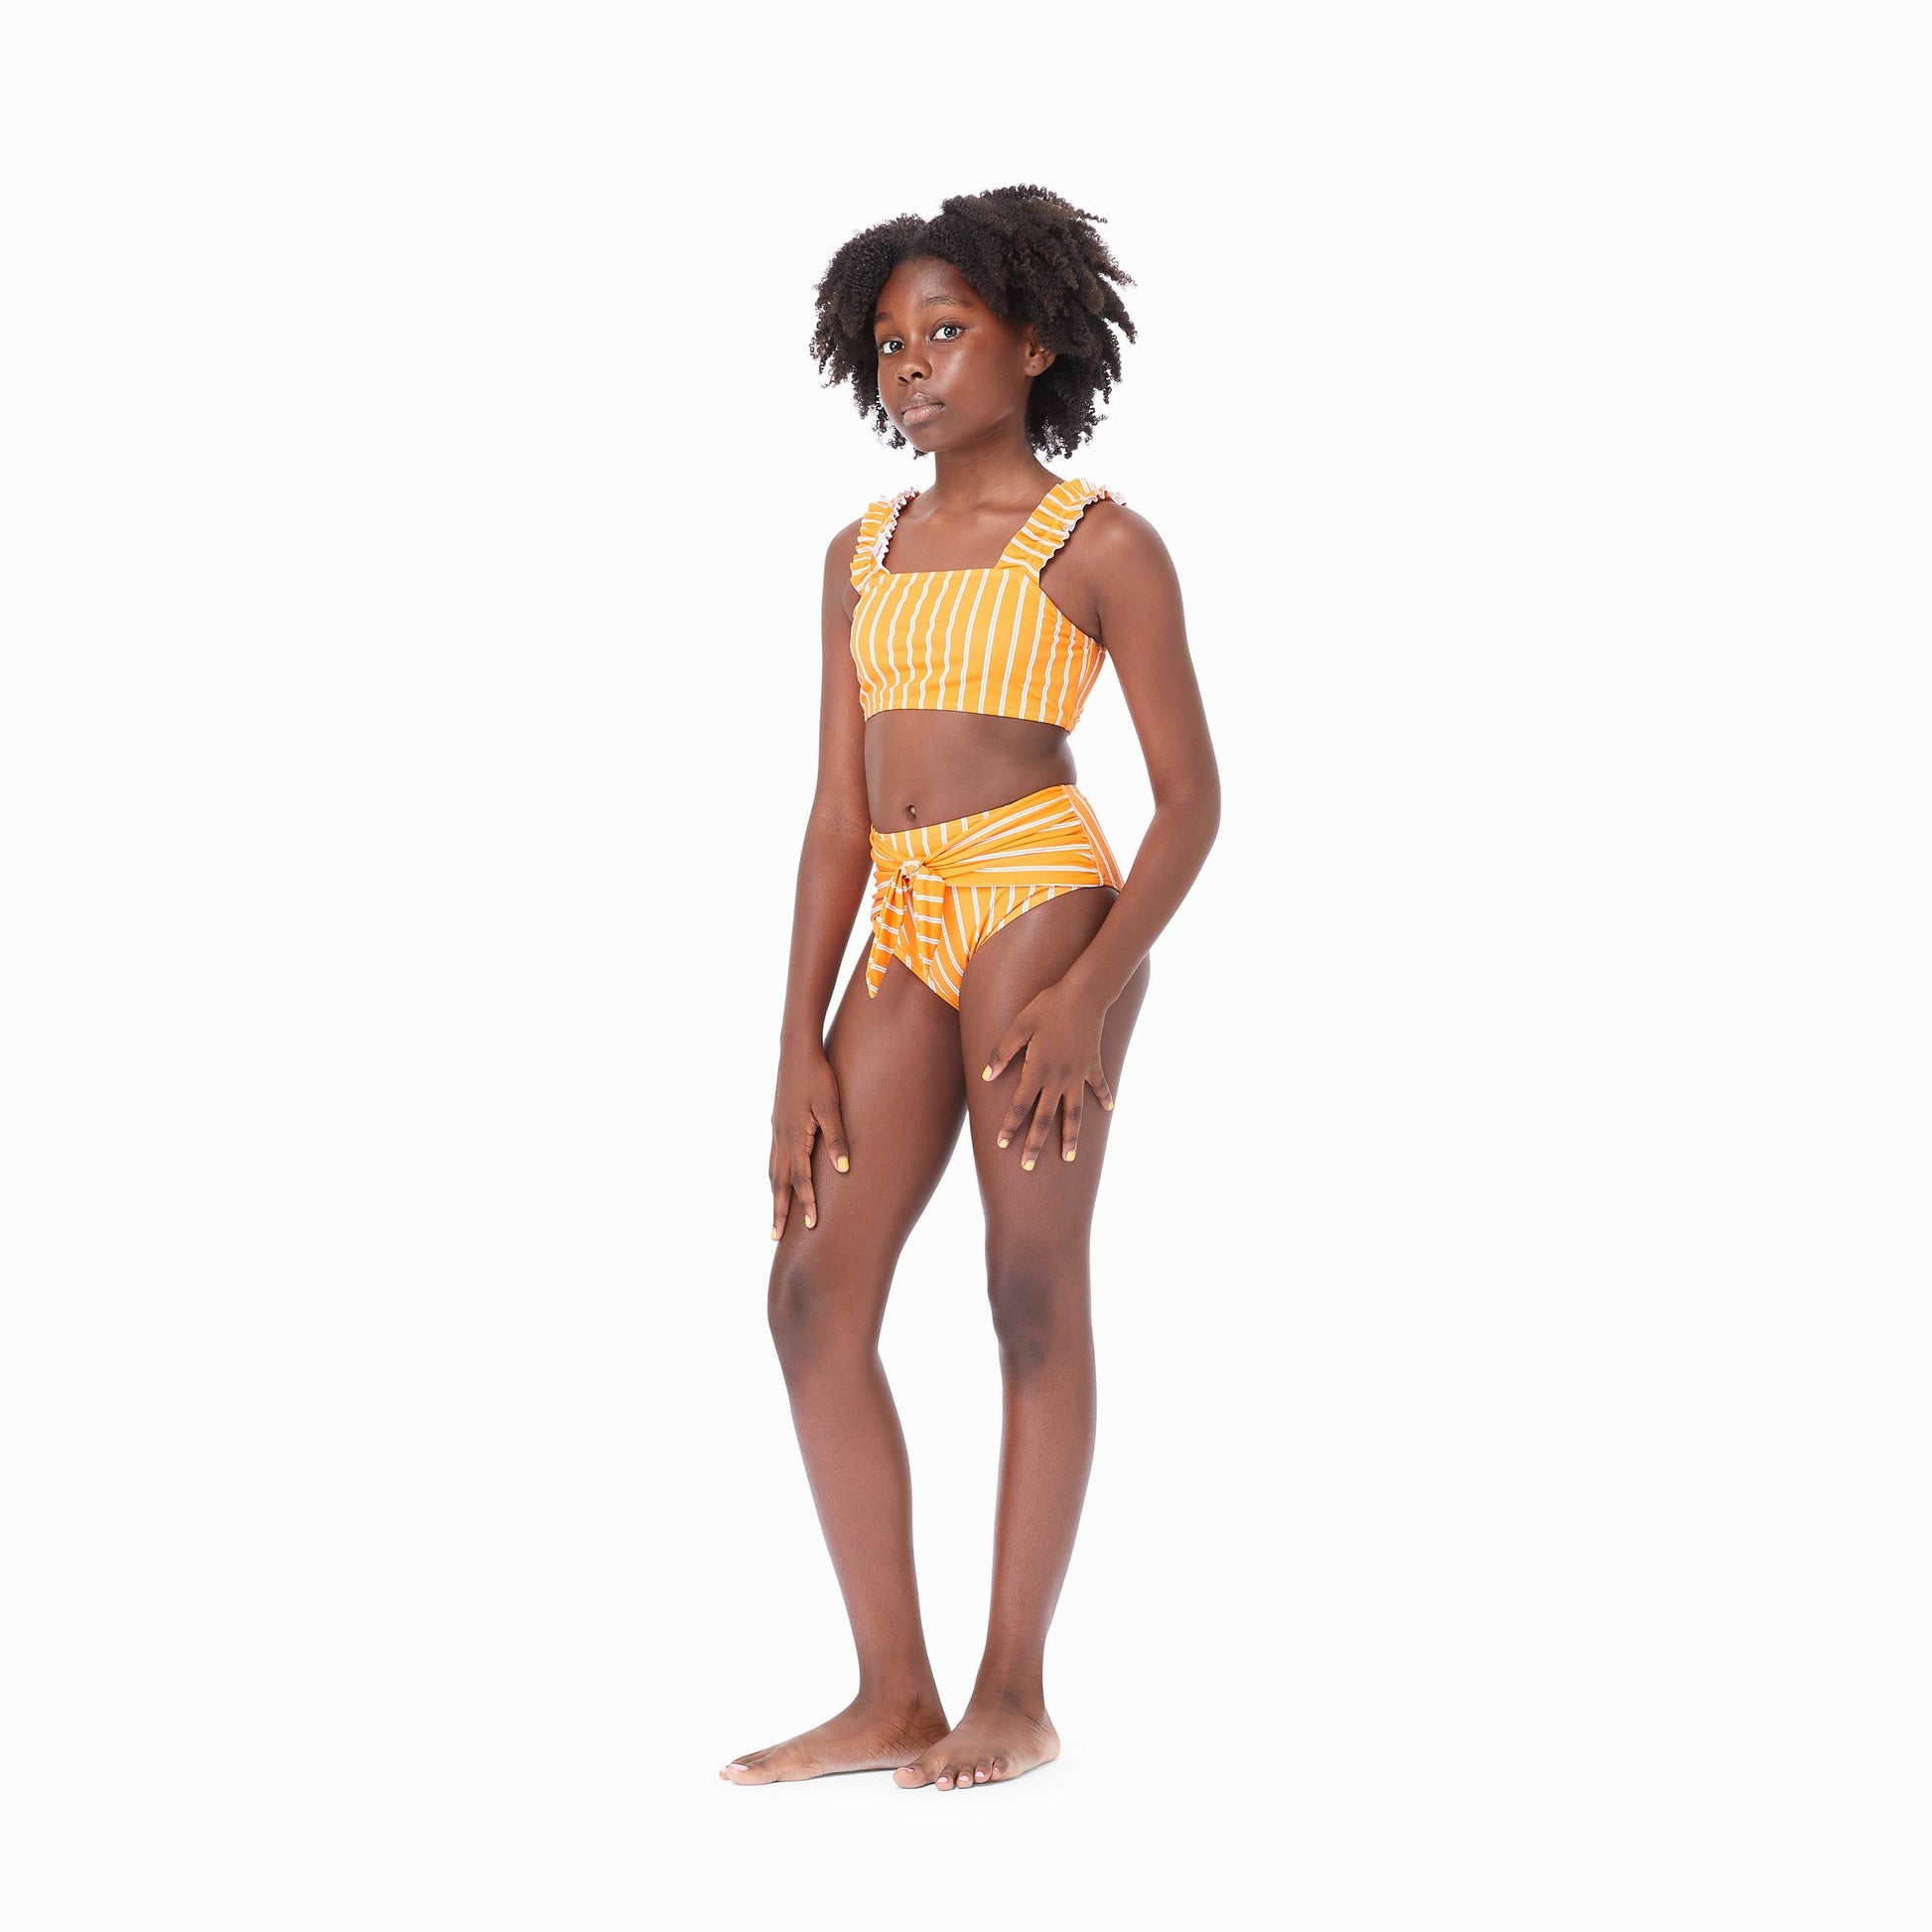 Pin on Two Piece Swimsuits